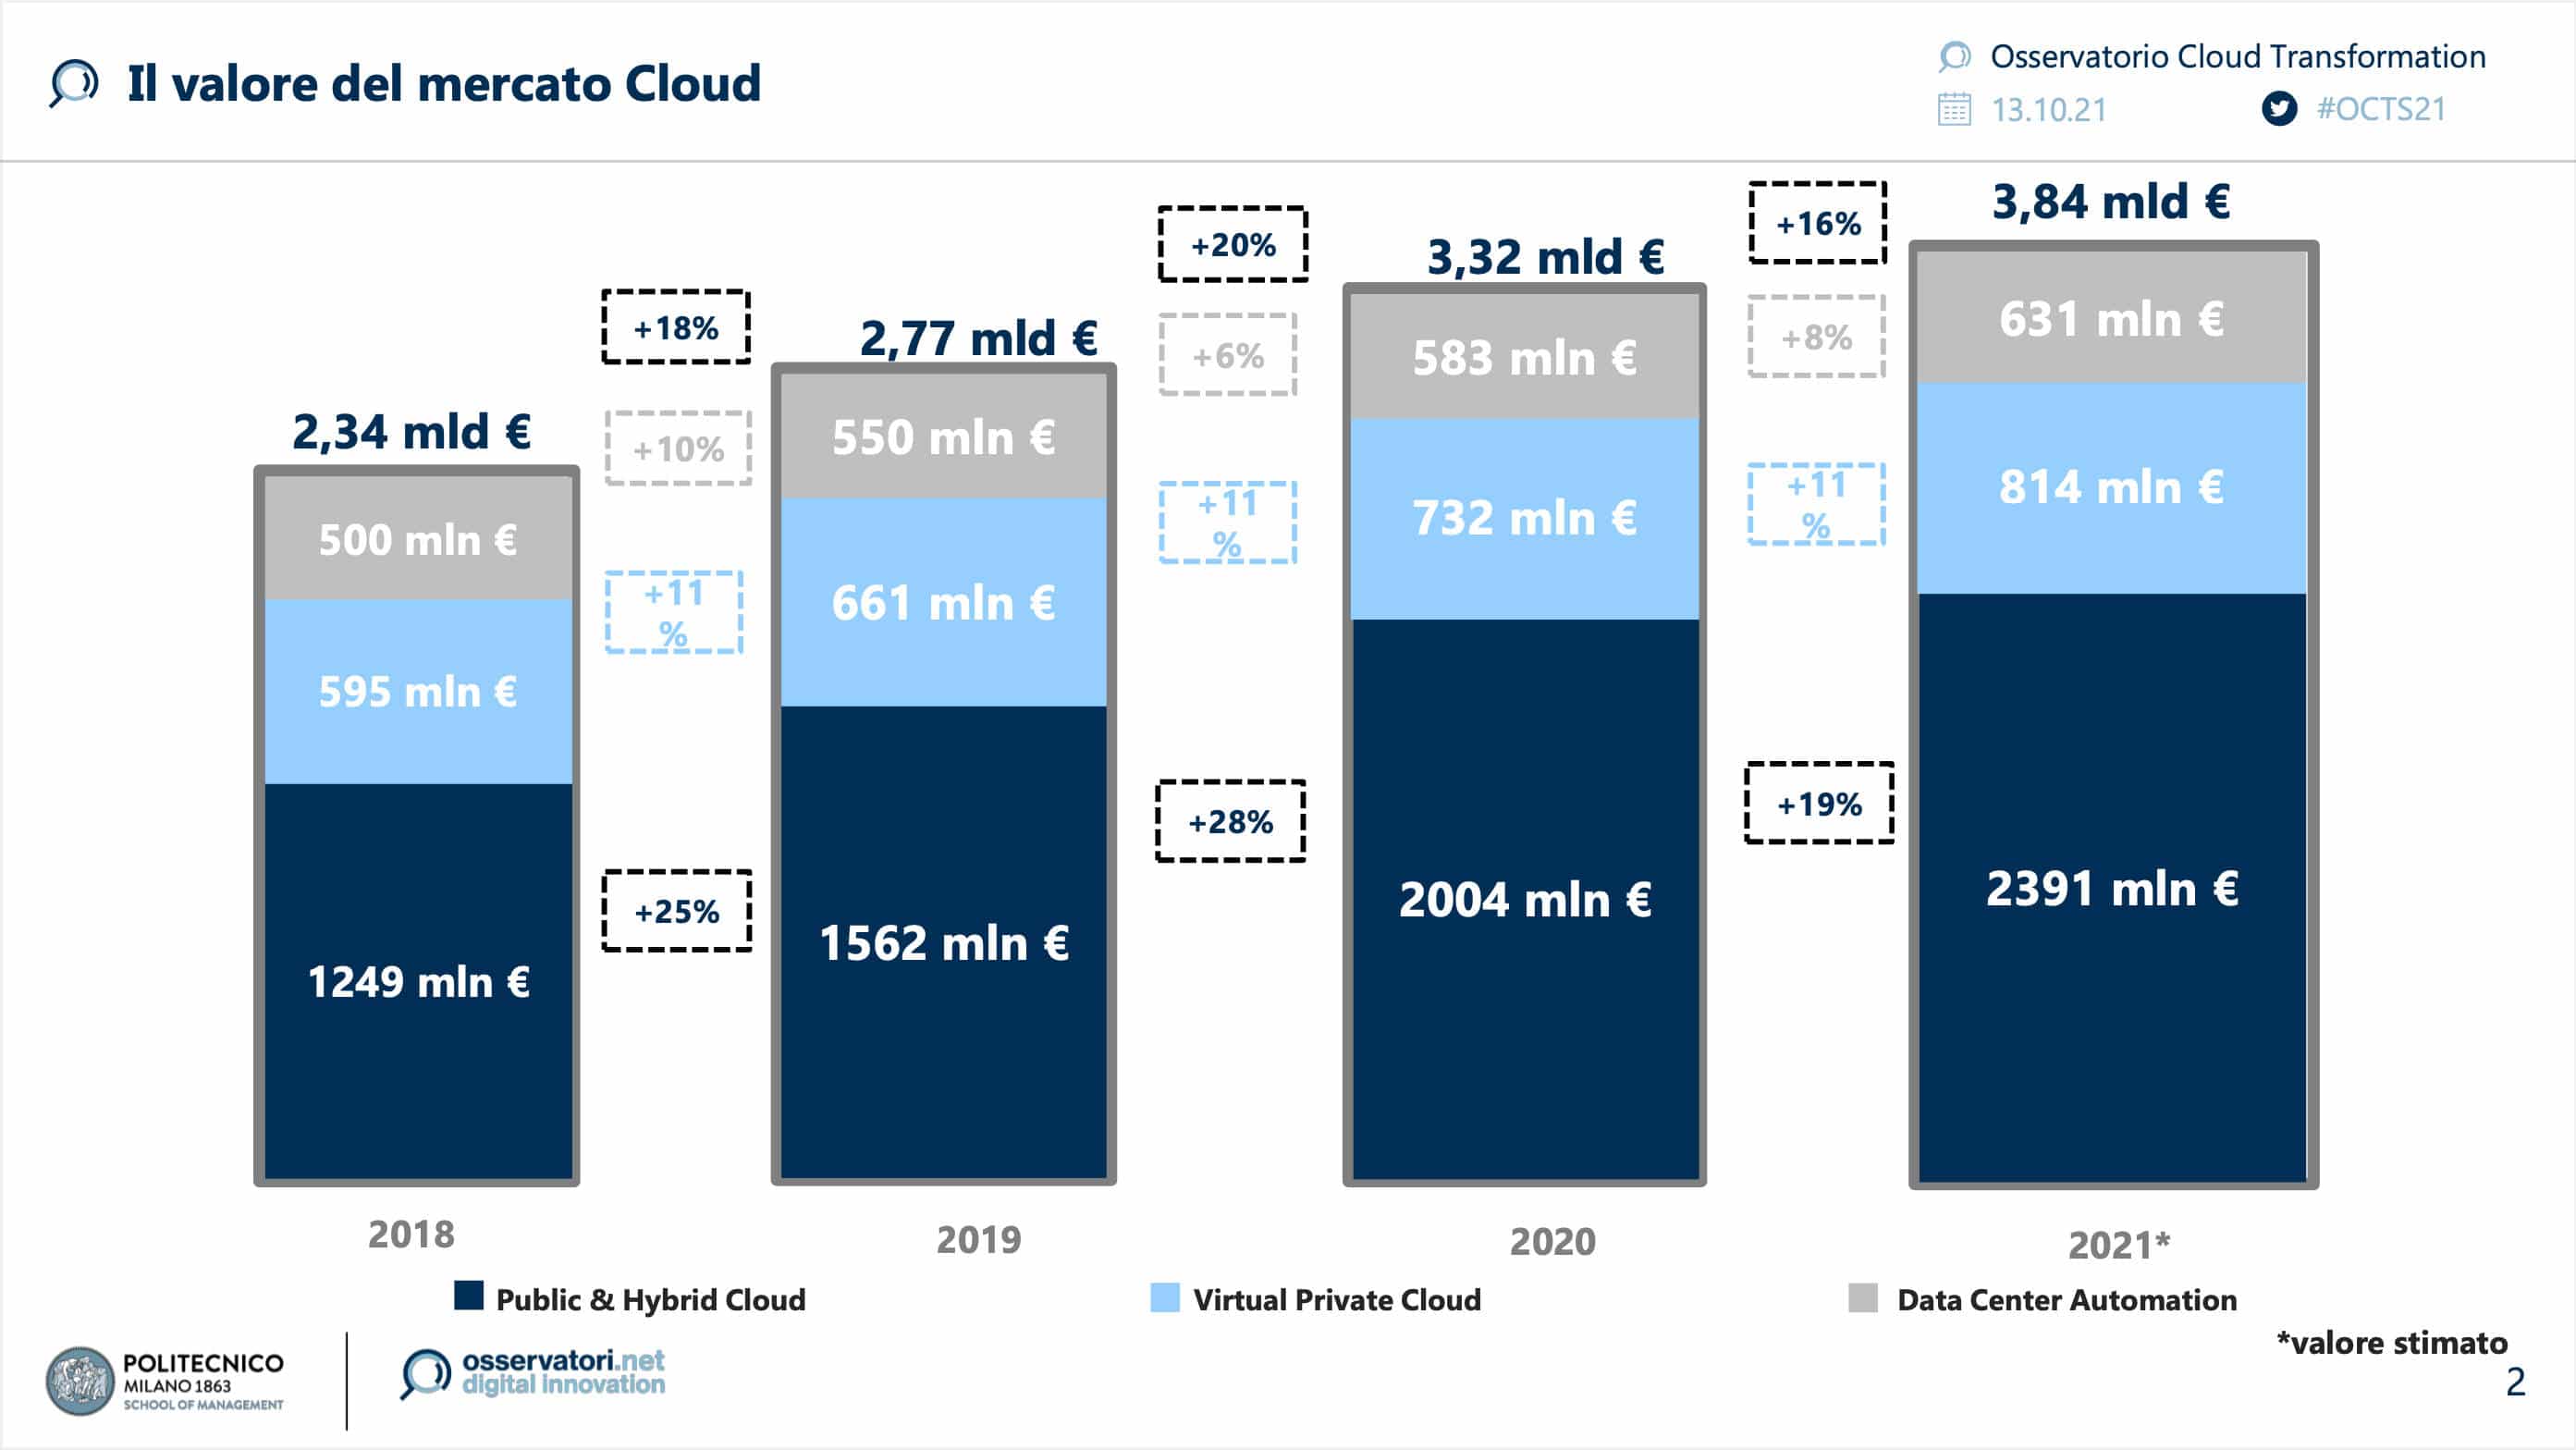 Value of the Cloud market in Italy